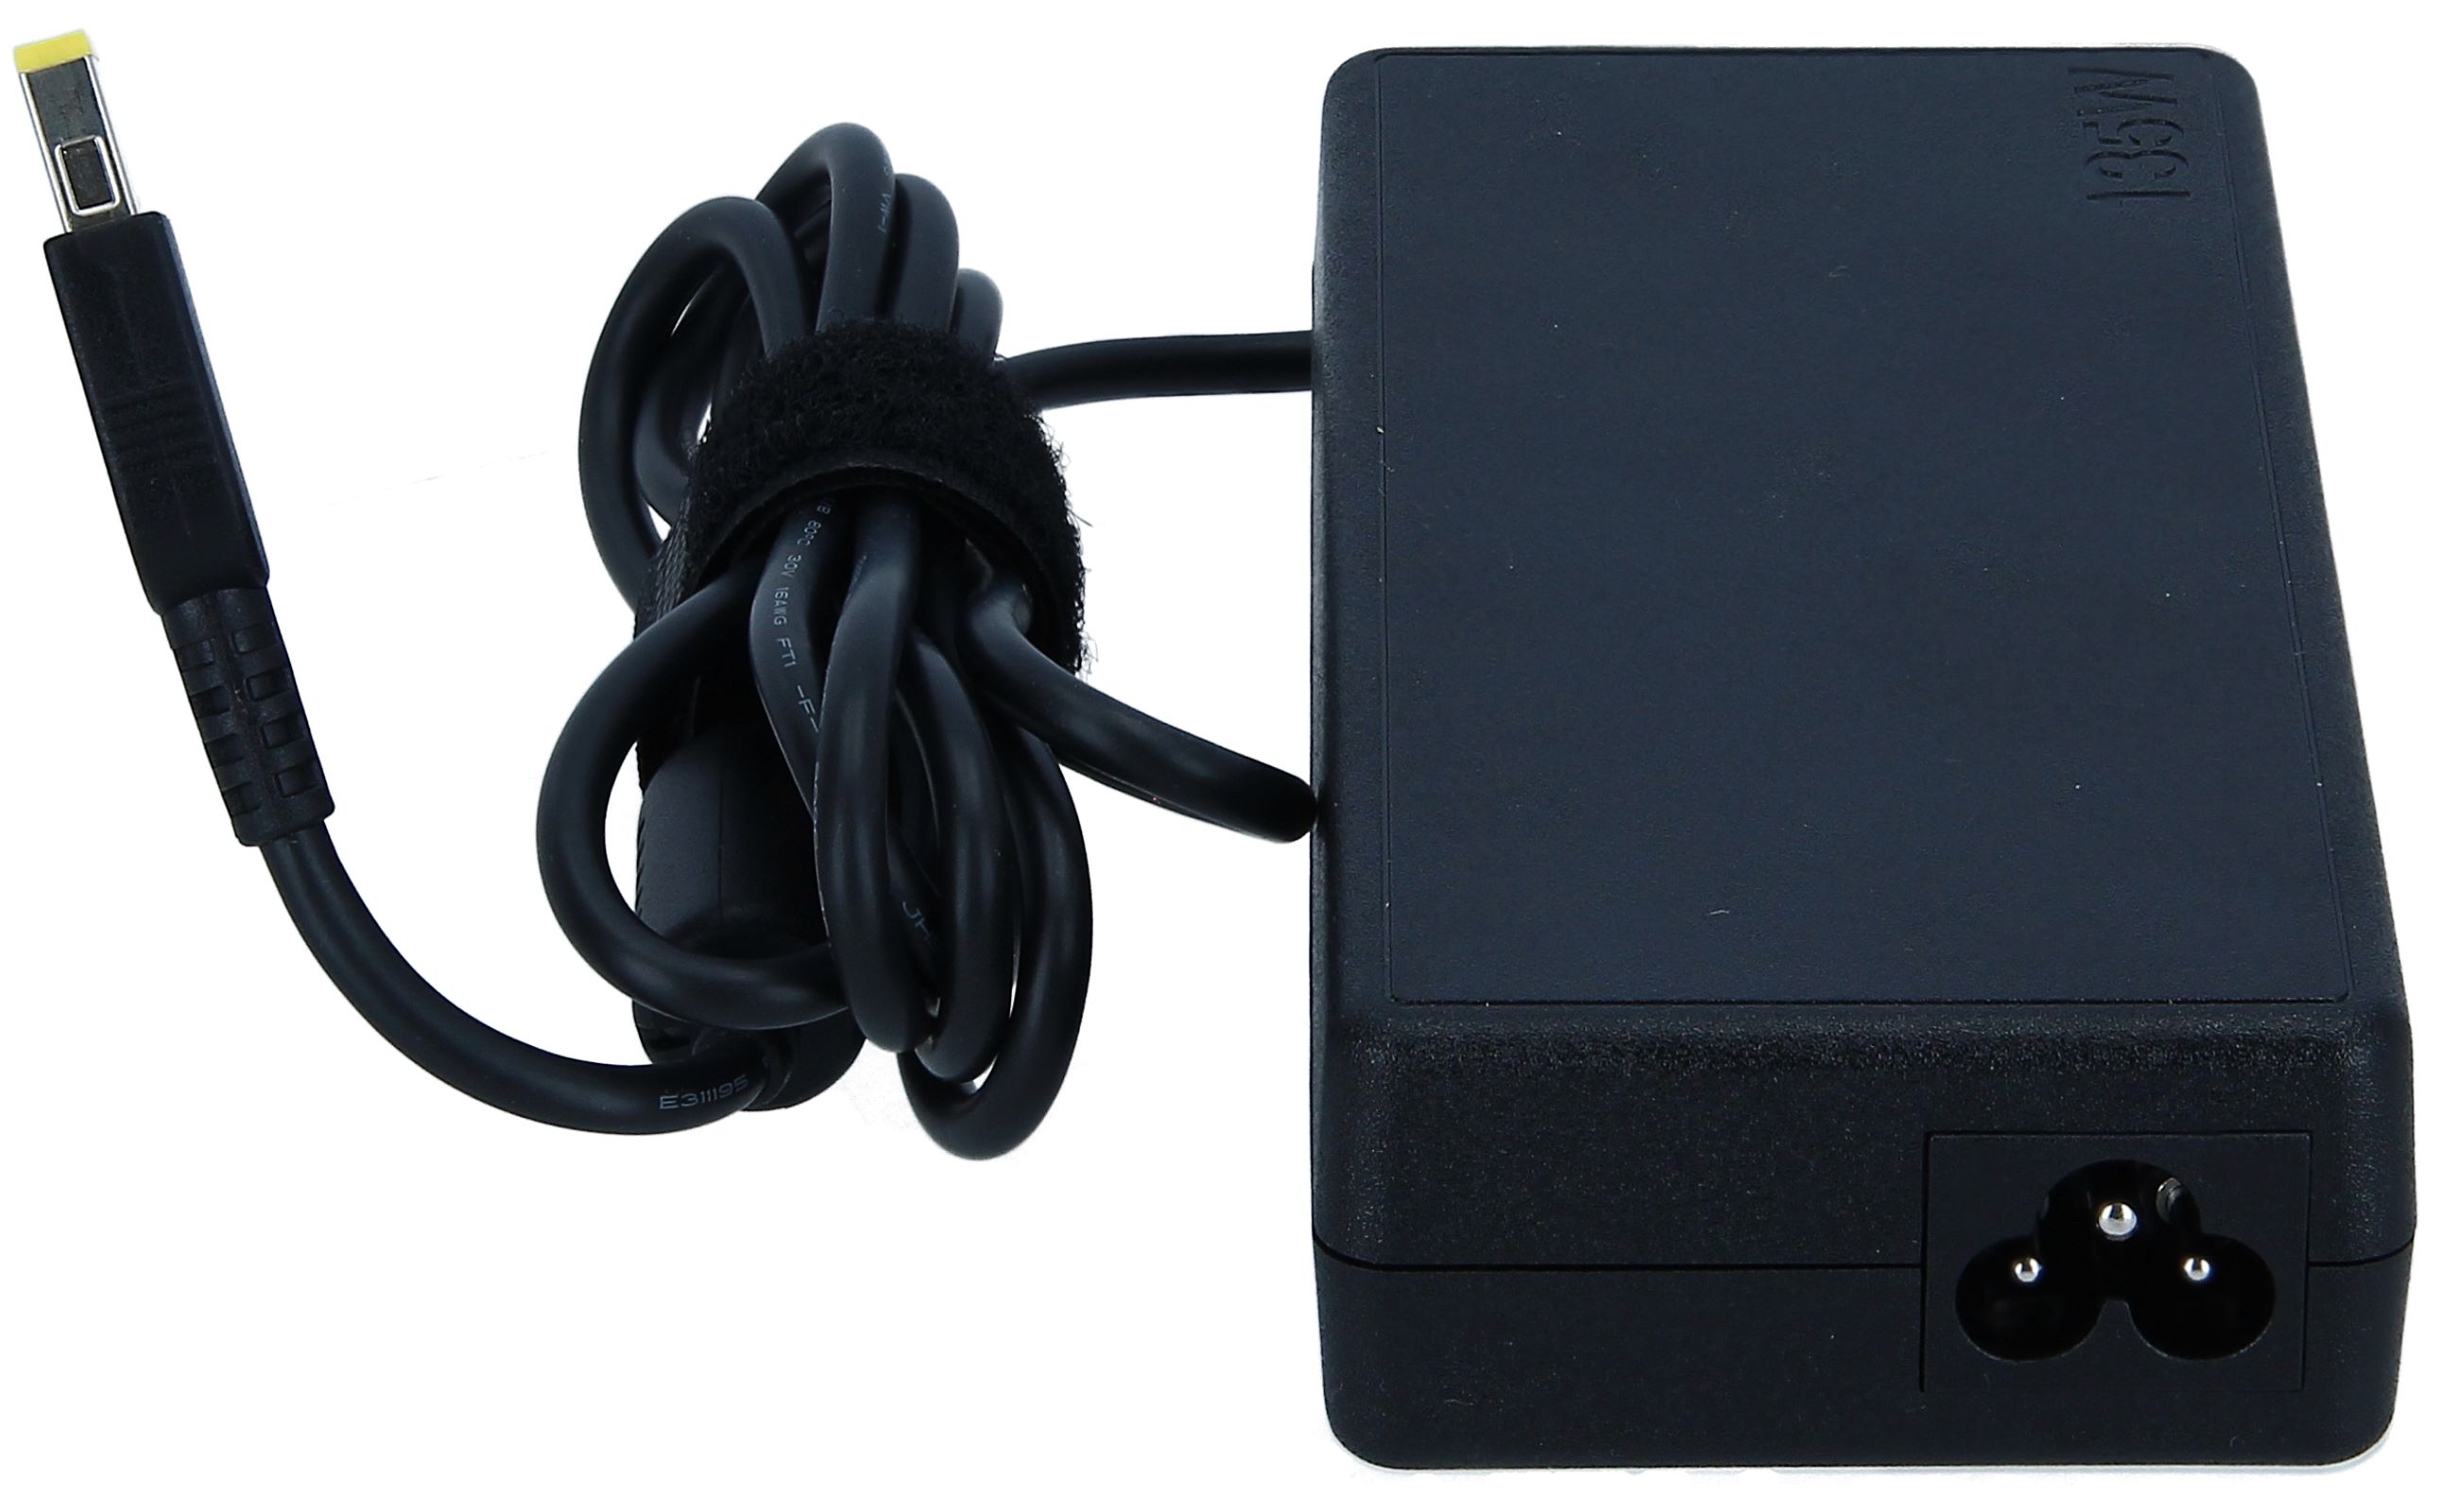 Relaterede korruption bag Lenovo - 4X20E50562 - Lenovo ThinkPad 135W AC Adapter (Slim Tip) - Netzteil  new and refurbished buy online low prices